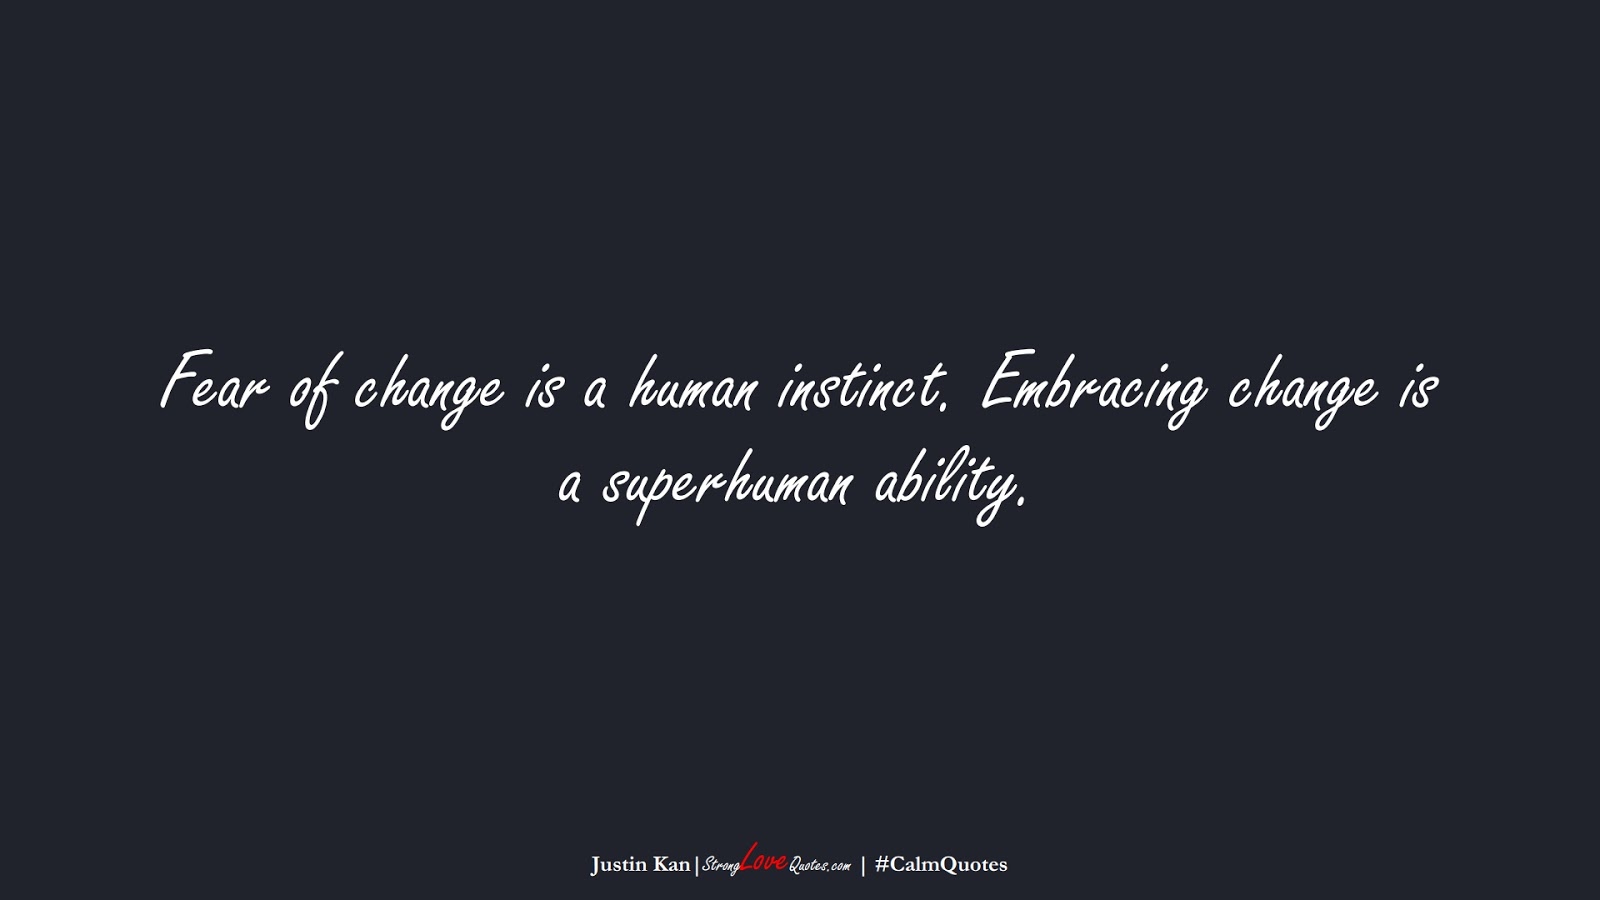 Fear of change is a human instinct. Embracing change is a superhuman ability. (Justin Kan);  #CalmQuotes